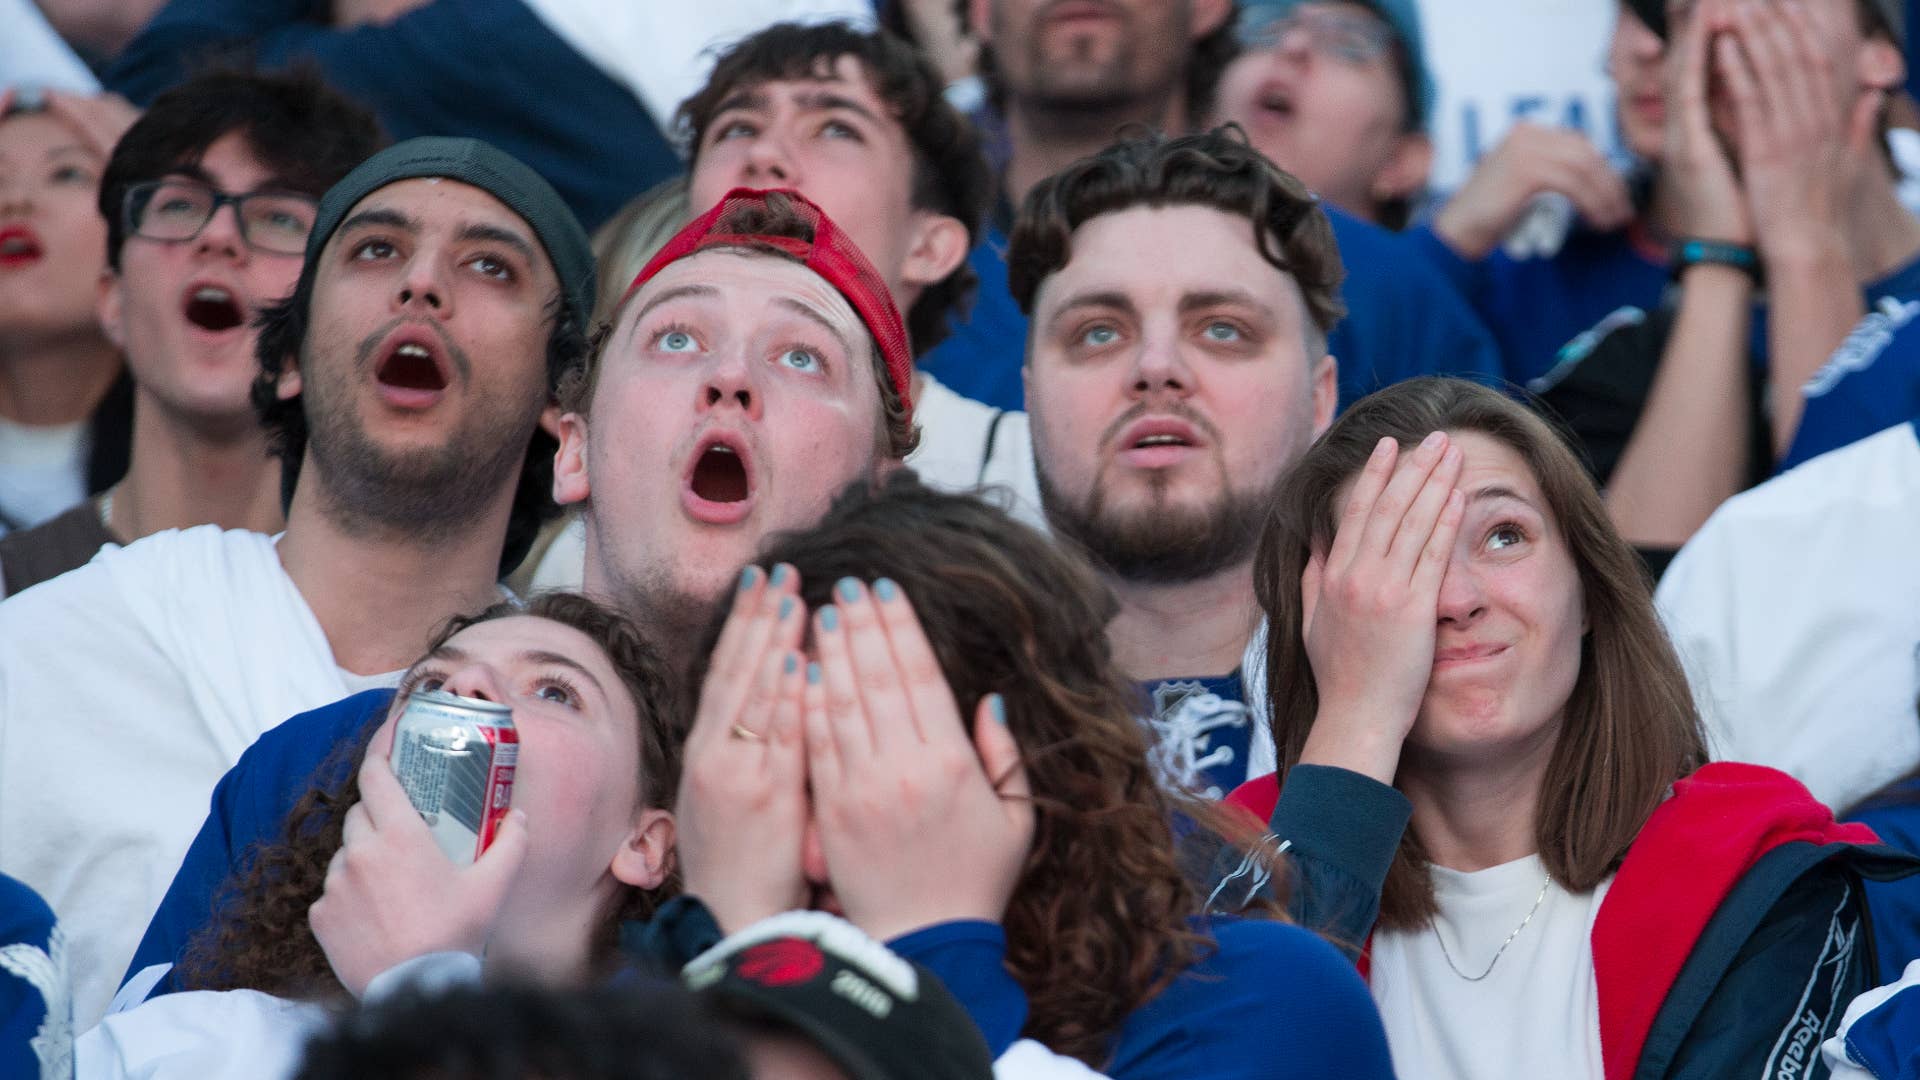 Toronto Maple Leafs fans gasping